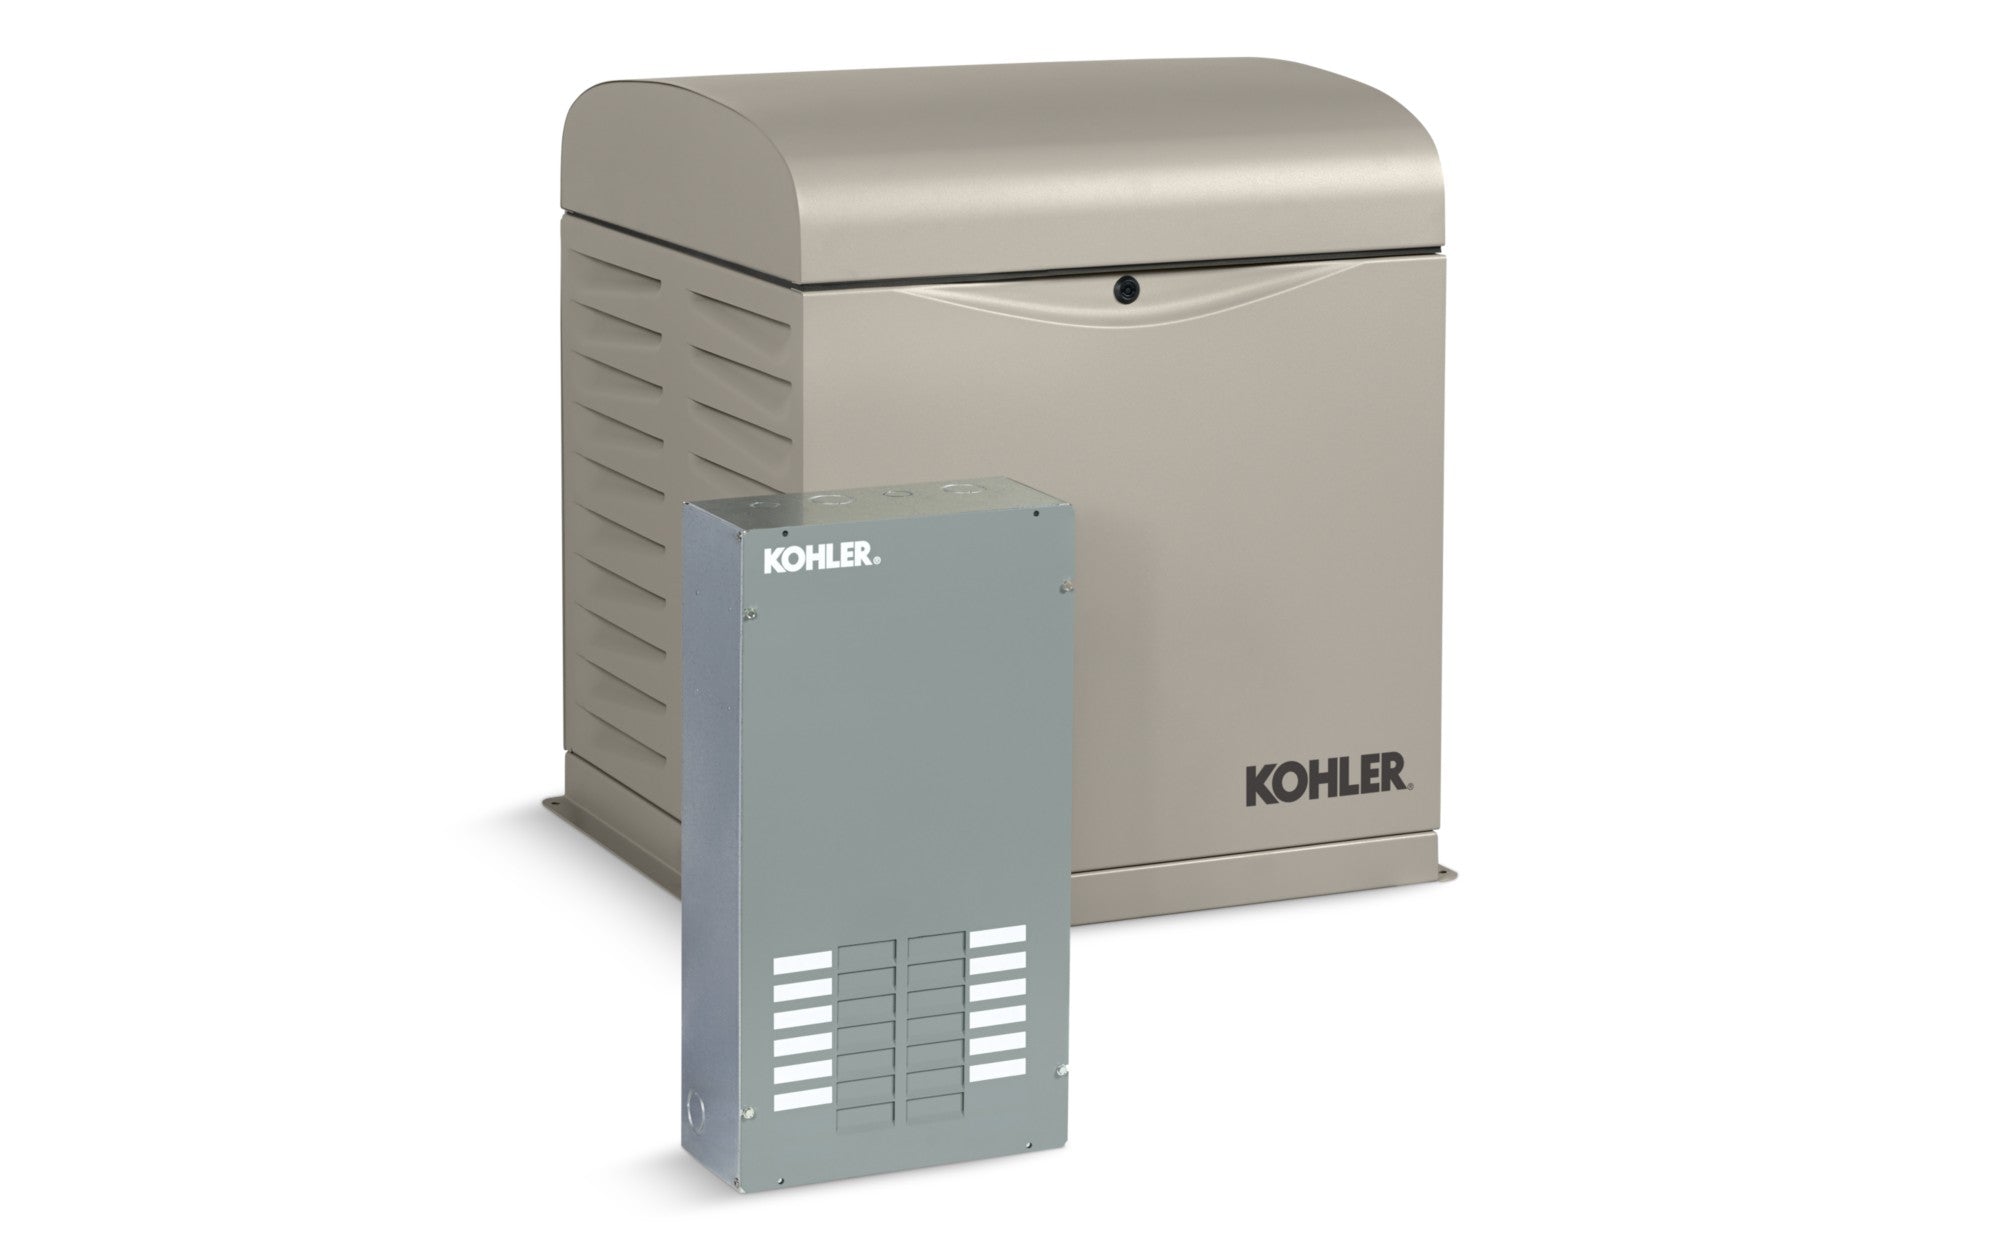 Kohler 10RESVL-100LC12 Air-Cooled Standby Generator with 100 Amp 12-Circuit Transfer Switch Single Phase, 10,000-Watt